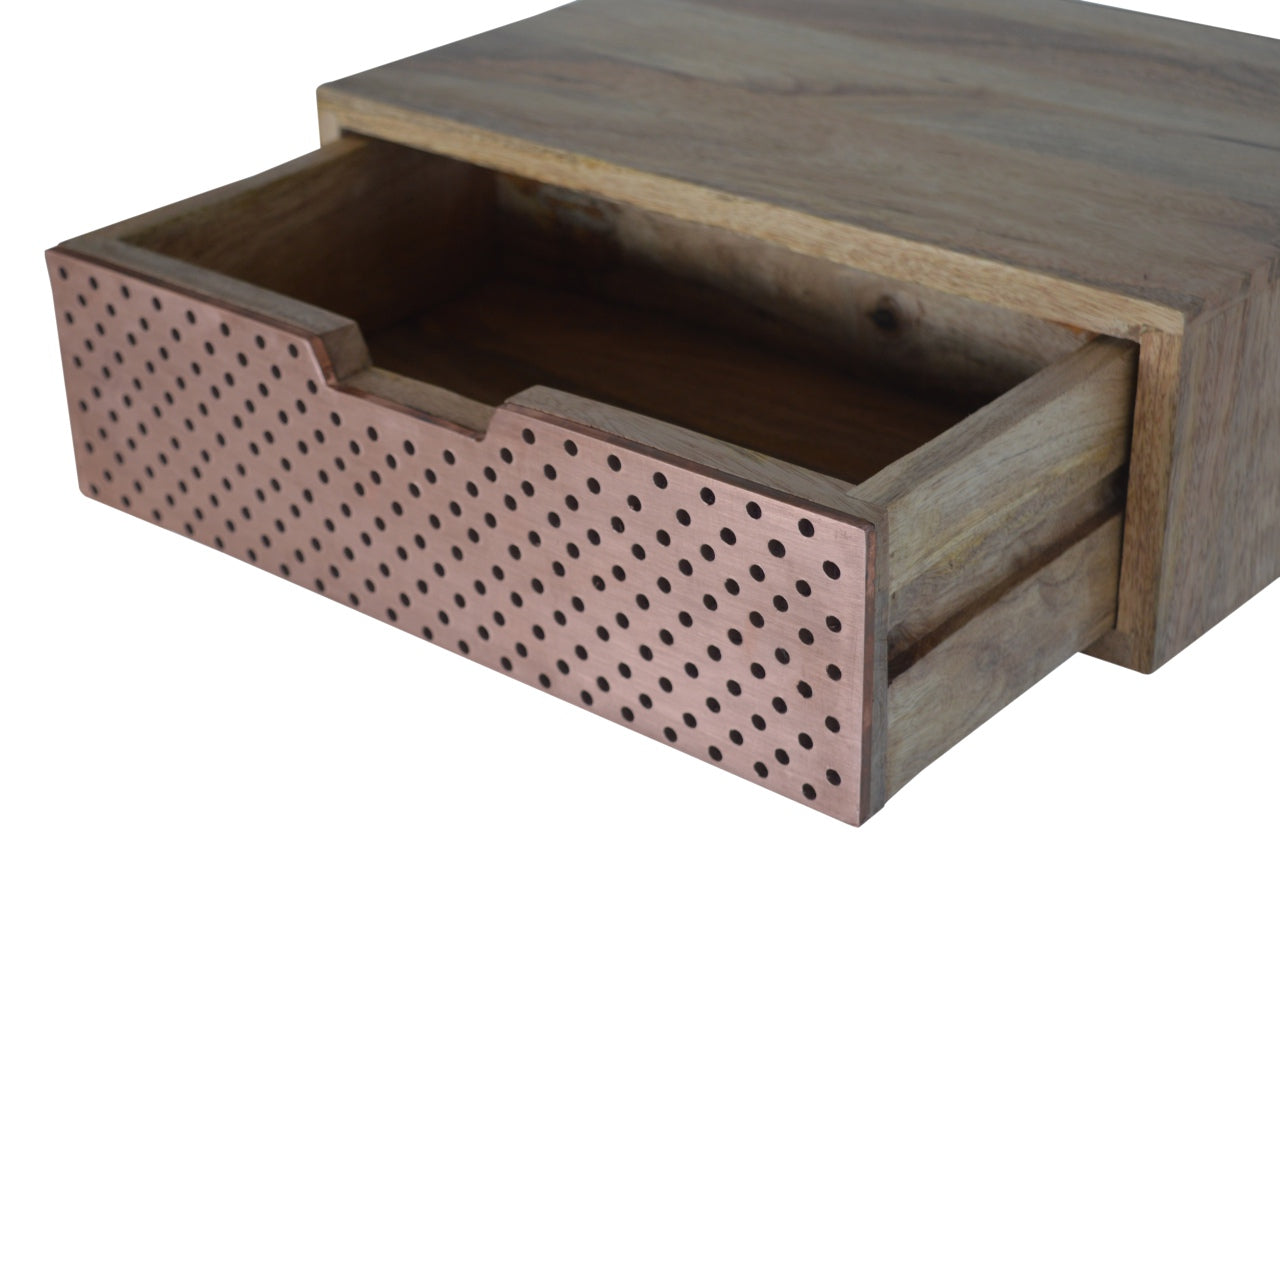 Wall Mounted Copper Floating Drawers - mancavesuperstore